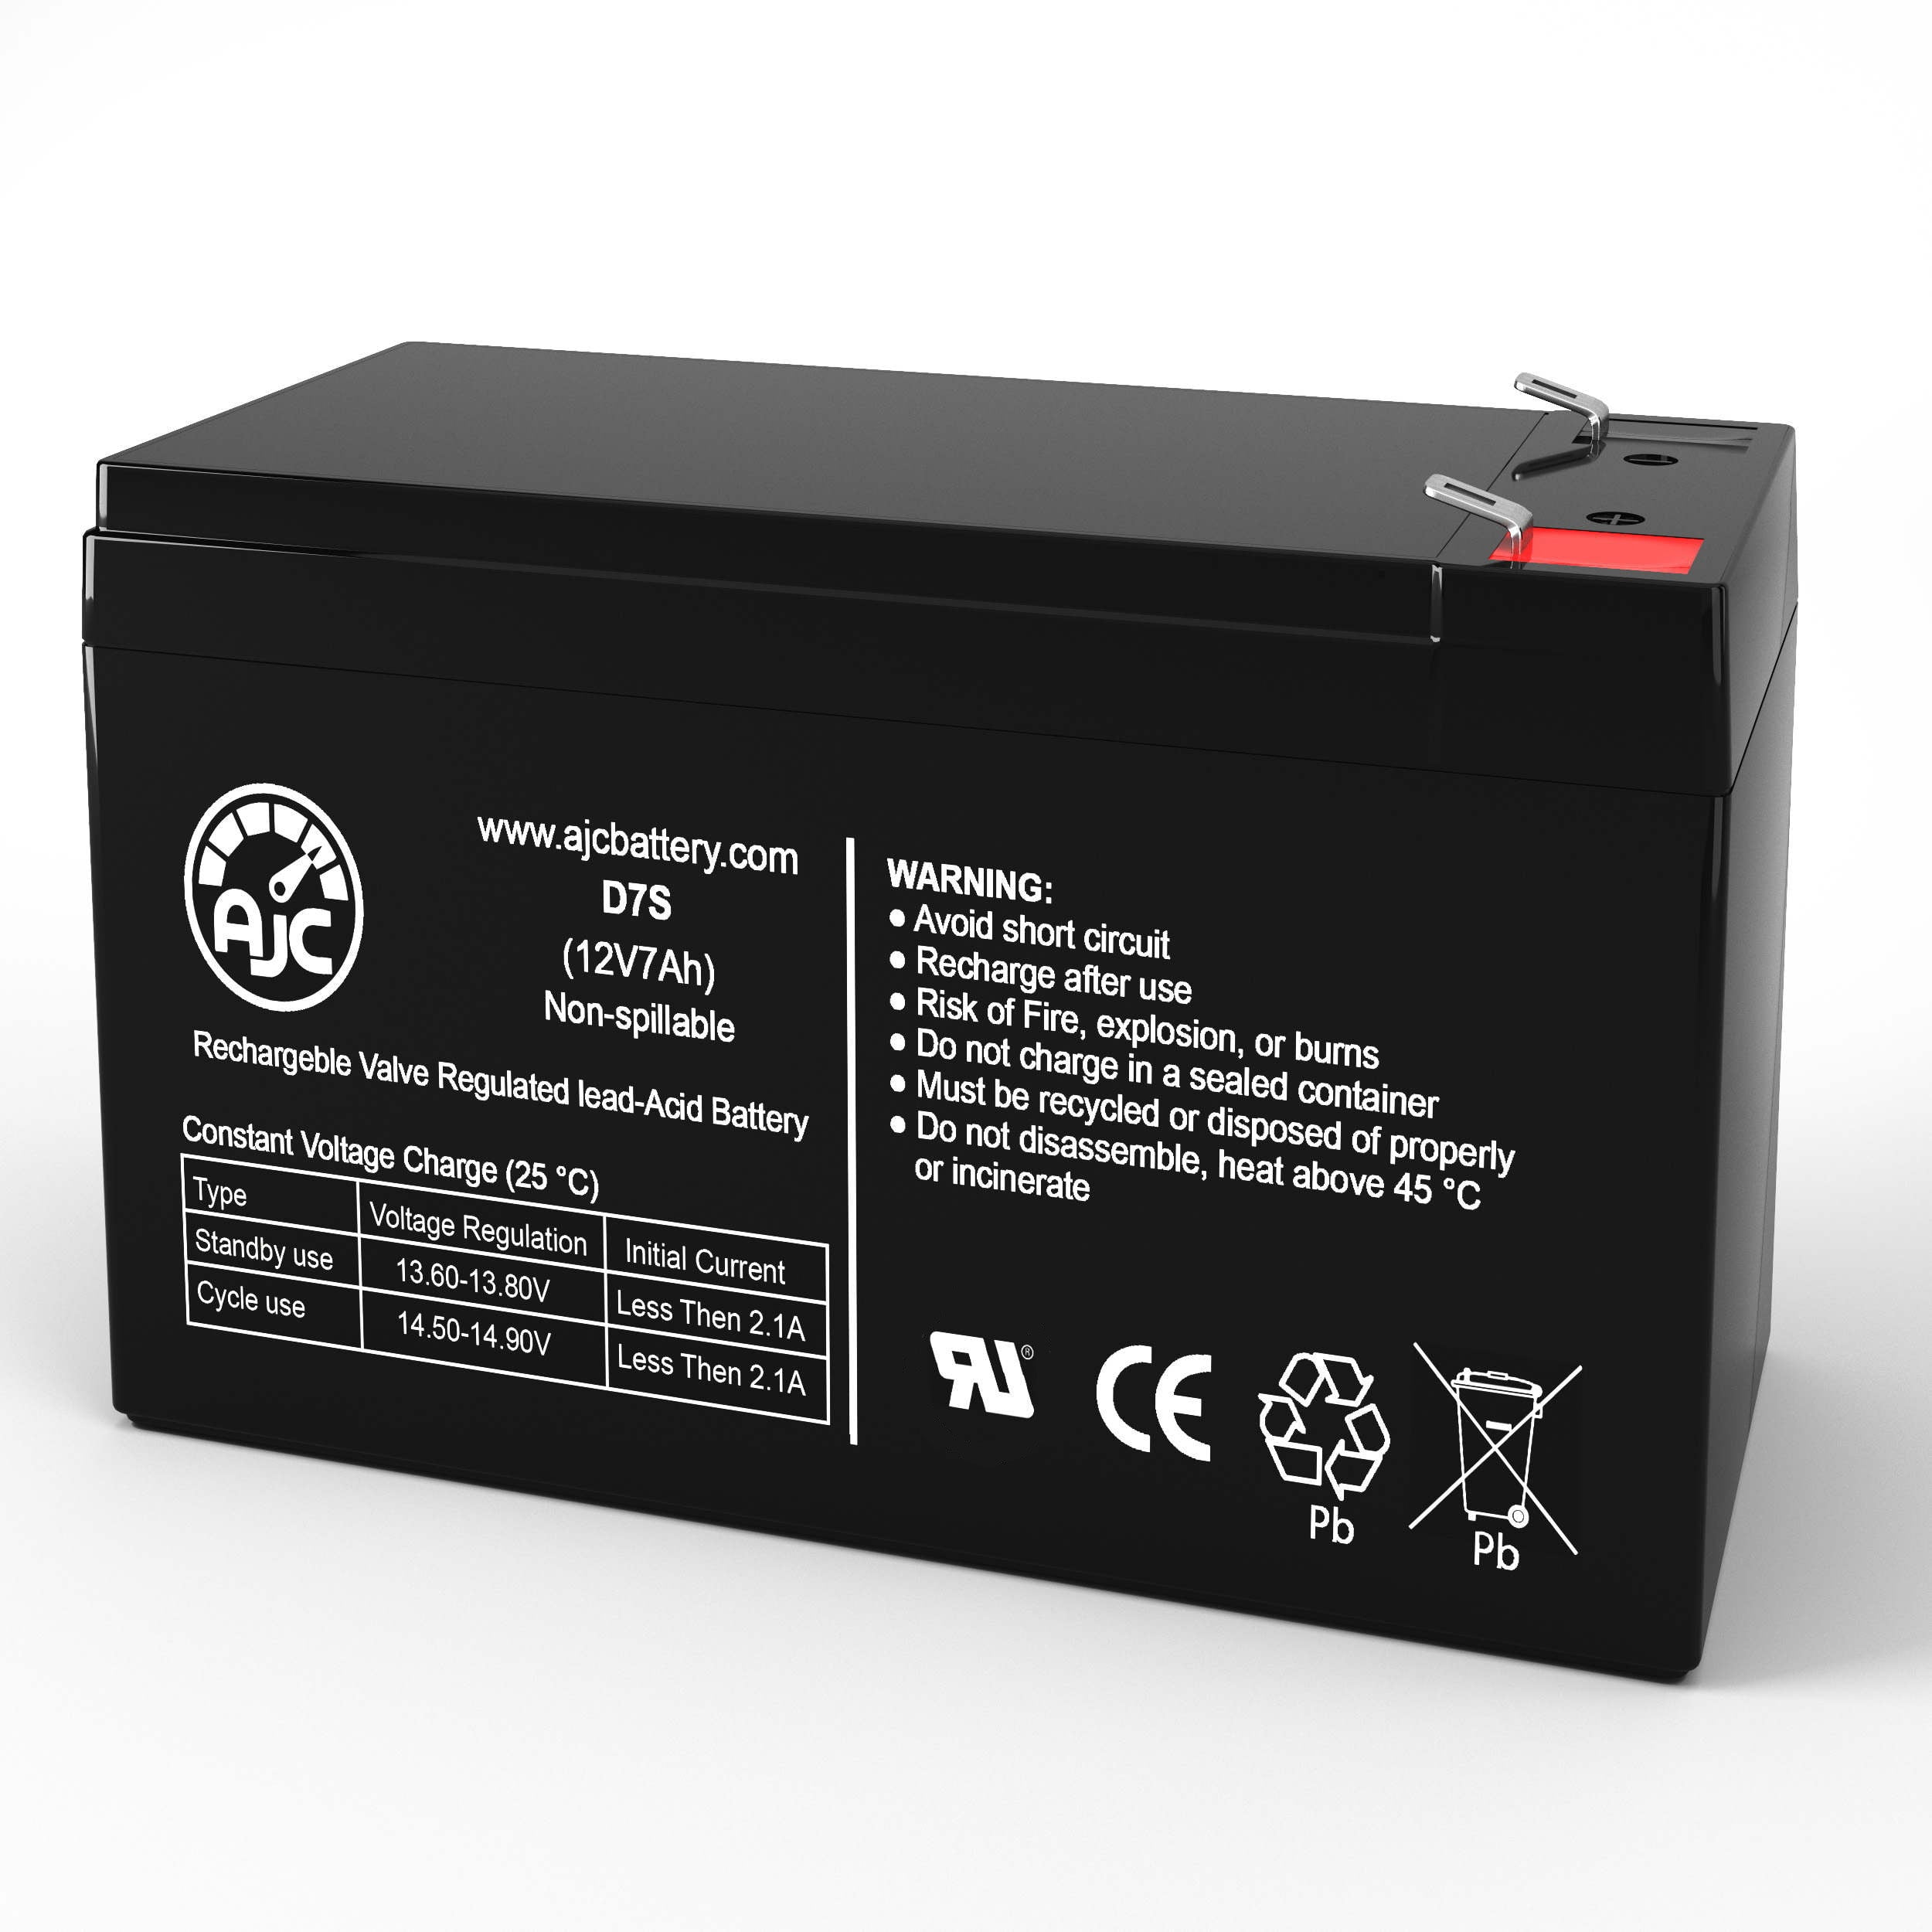 Duracell DURA12-7F2 12V 7Ah Sealed Lead Acid Battery - This Is an